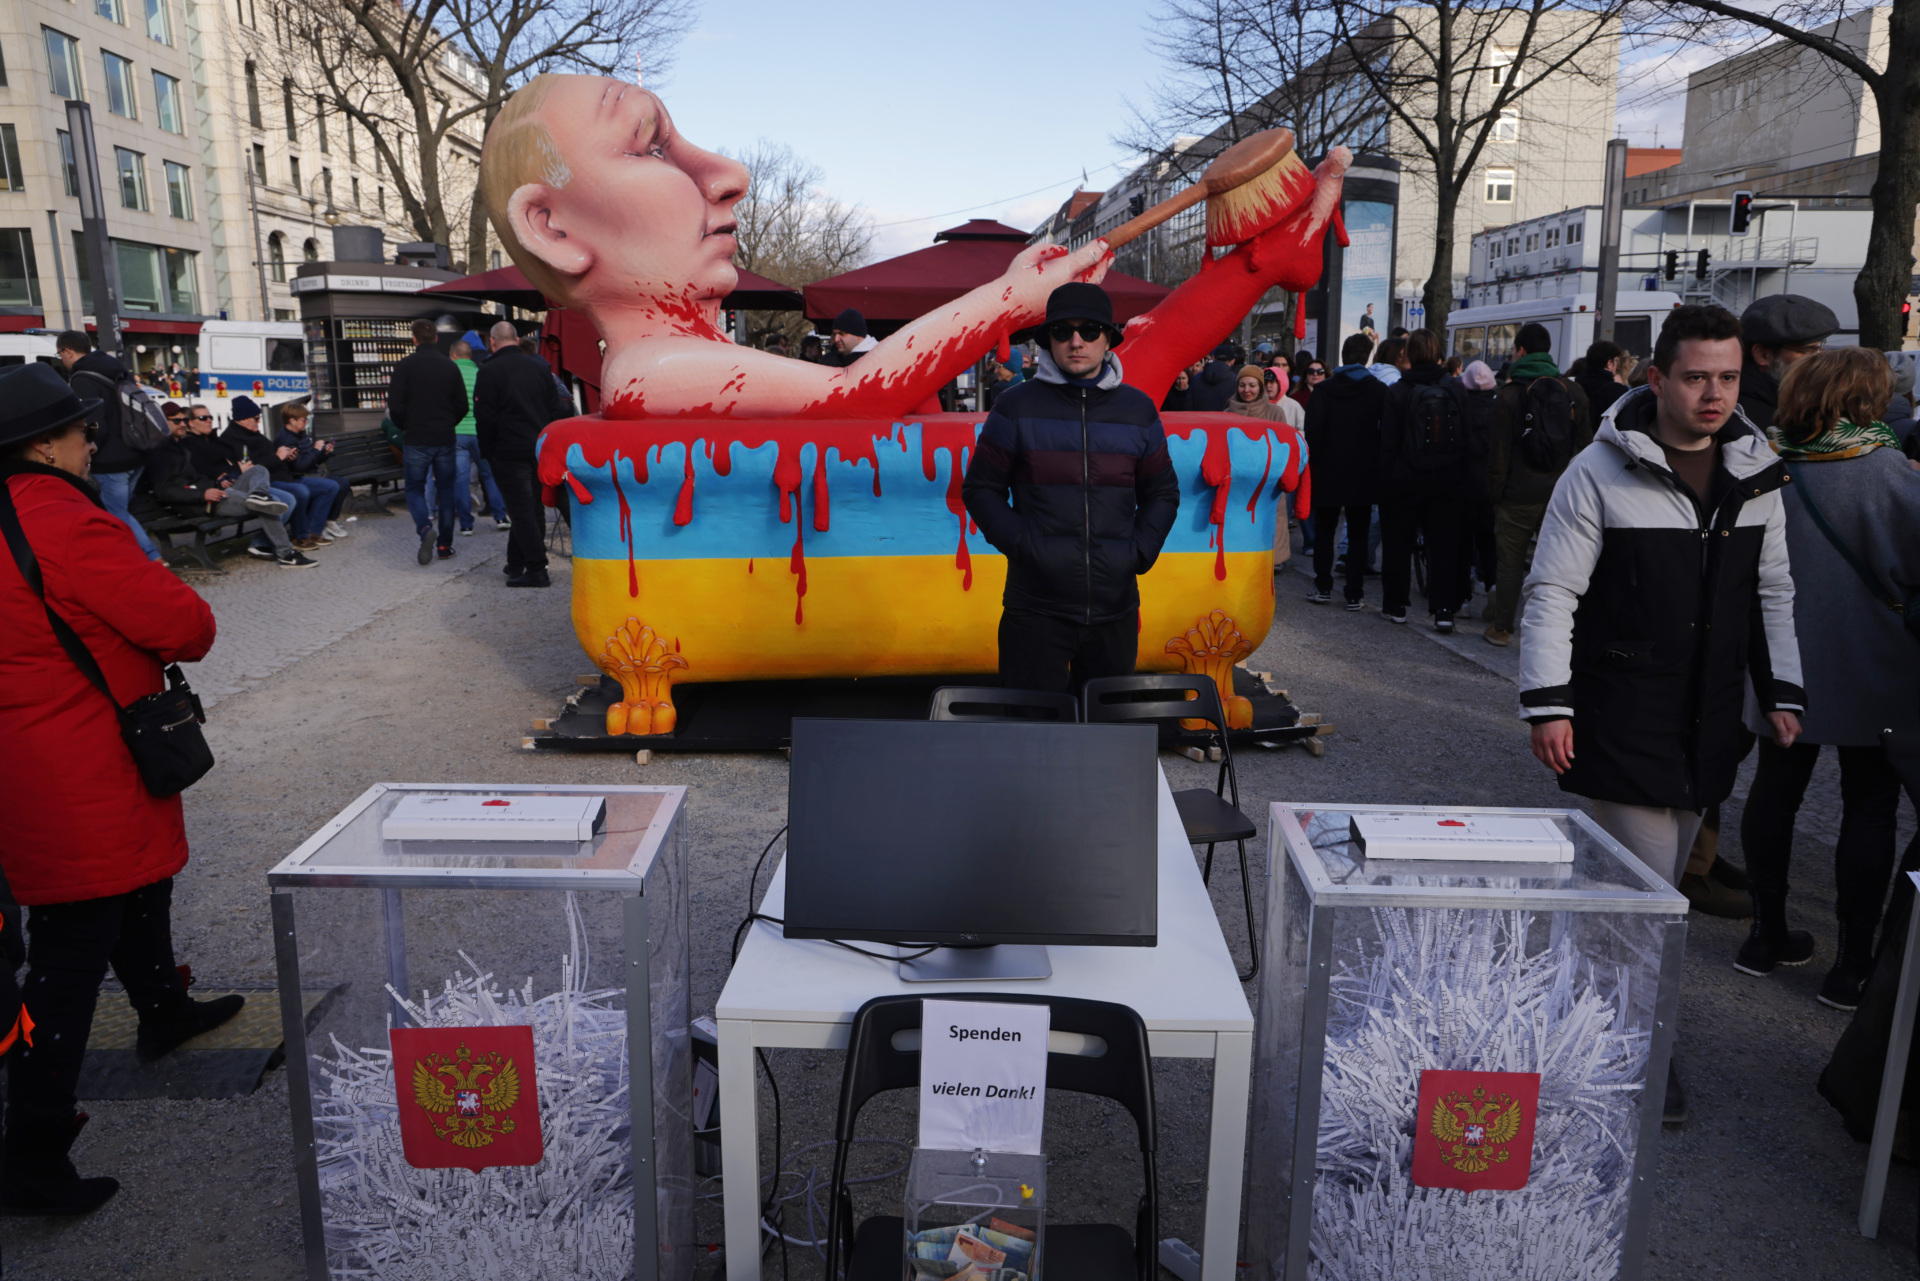 BERLIN, GERMANY - MARCH 17: Mock voting urns with shredded ballots stand in front of an effigy of Russian President Vladimir Putin bathing in the blood of Ukraine at a protest outside the Russian Embassy during Russian elections on March 17, 2024 in Berlin, Germany. Presidential elections in Russia, which are taking place without any meaningful opposition candidates allowed, will conclude today with President Vladimir Putin all but certain to be reelected. (Photo by Sean Gallup/Getty Images)